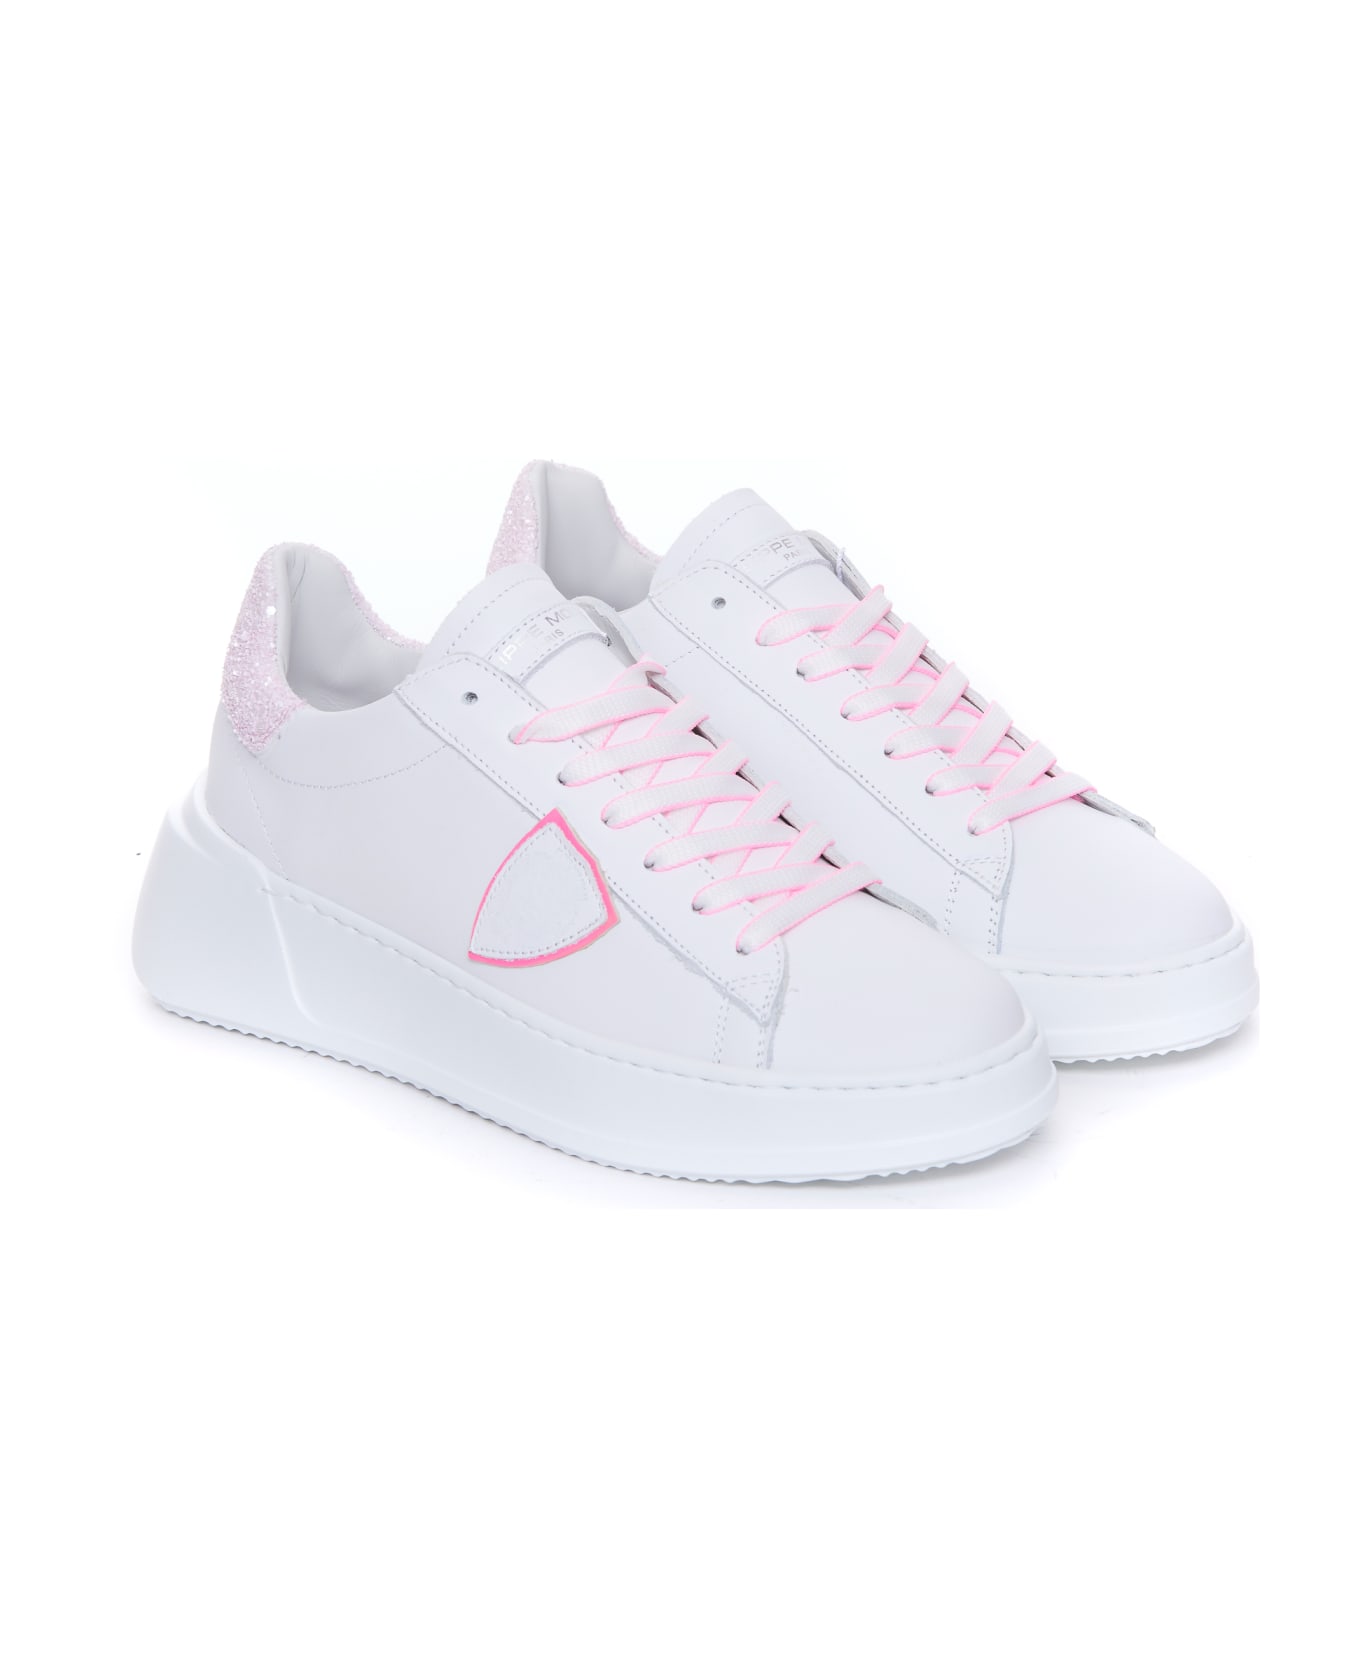 Philippe Model Tres Temple Sneakers - White